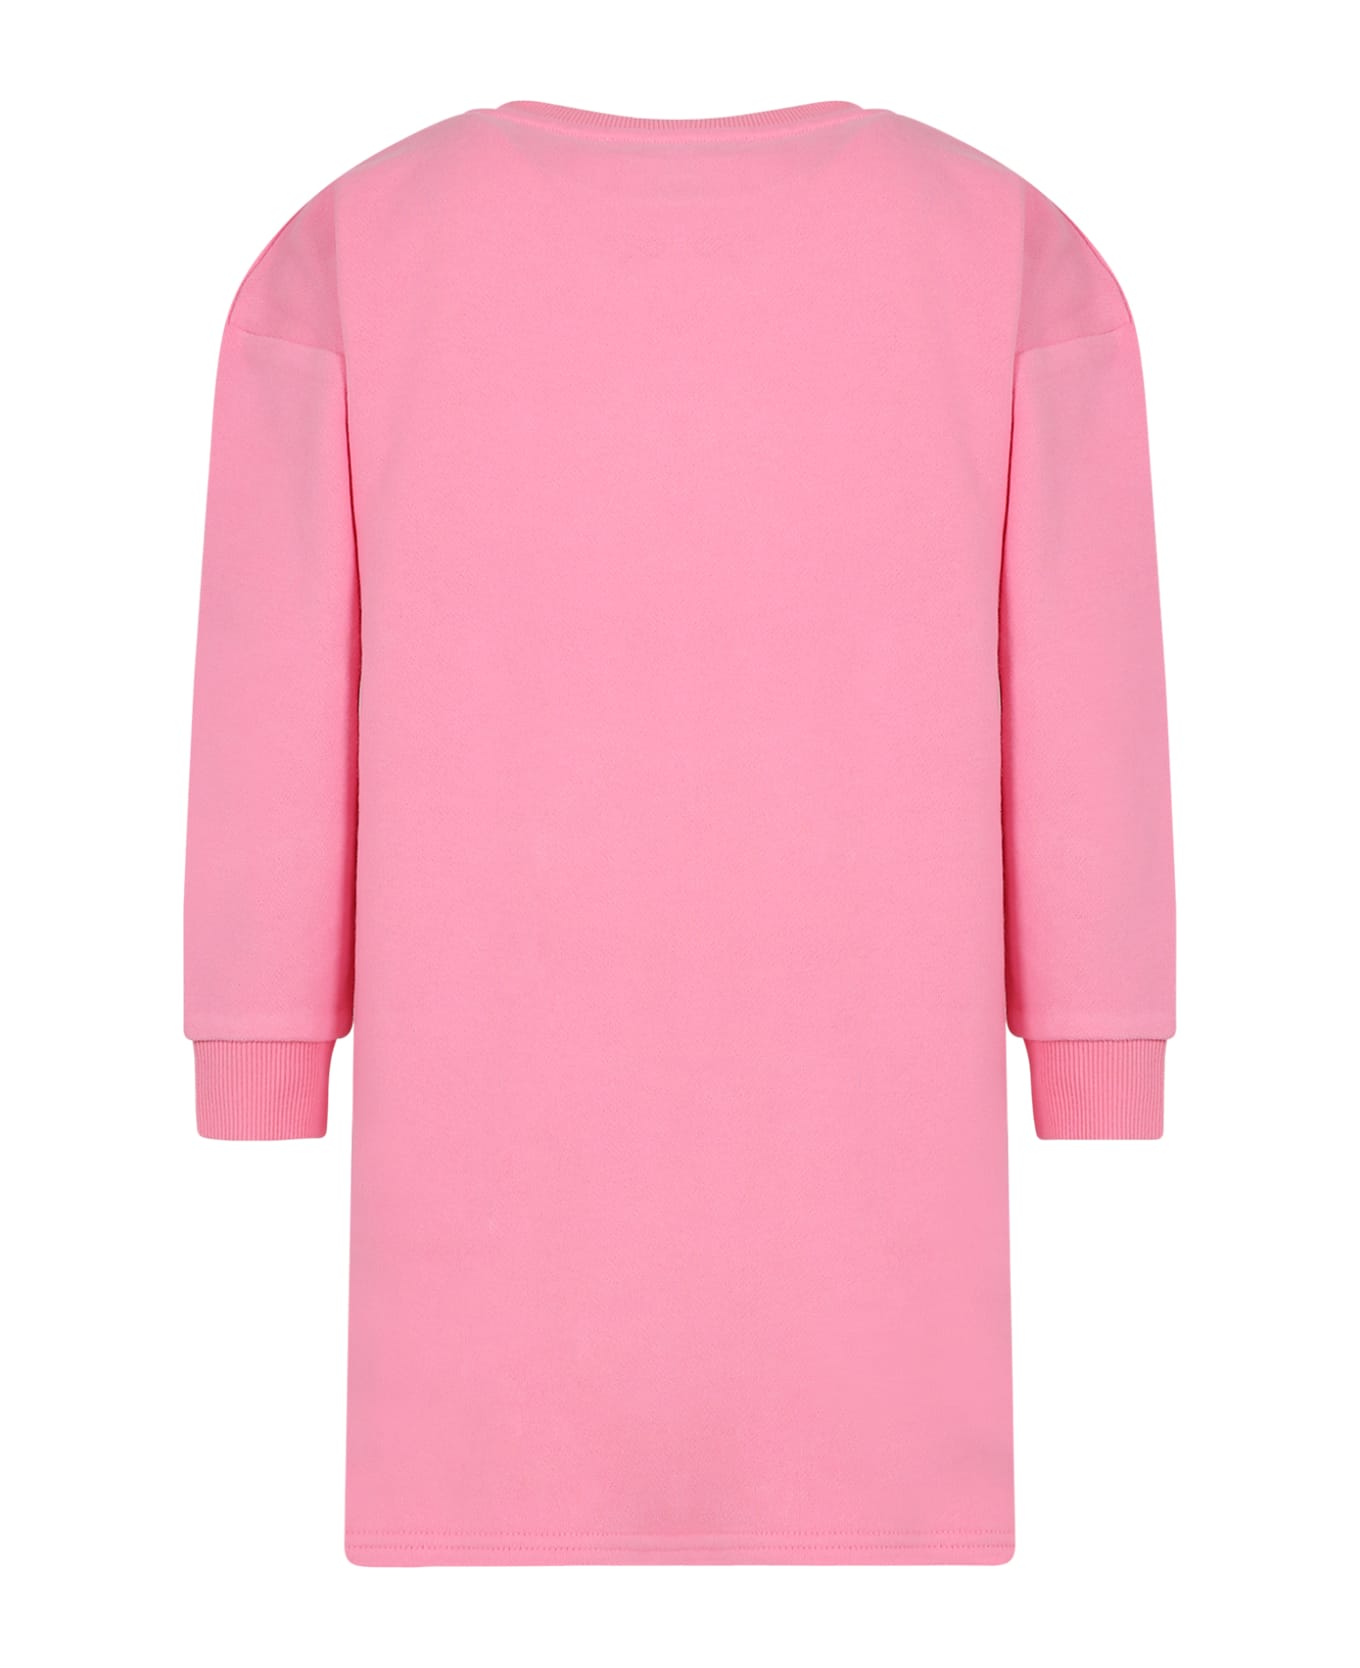 Marc Jacobs Casual Pink Dress For Girl With Logo - Pink